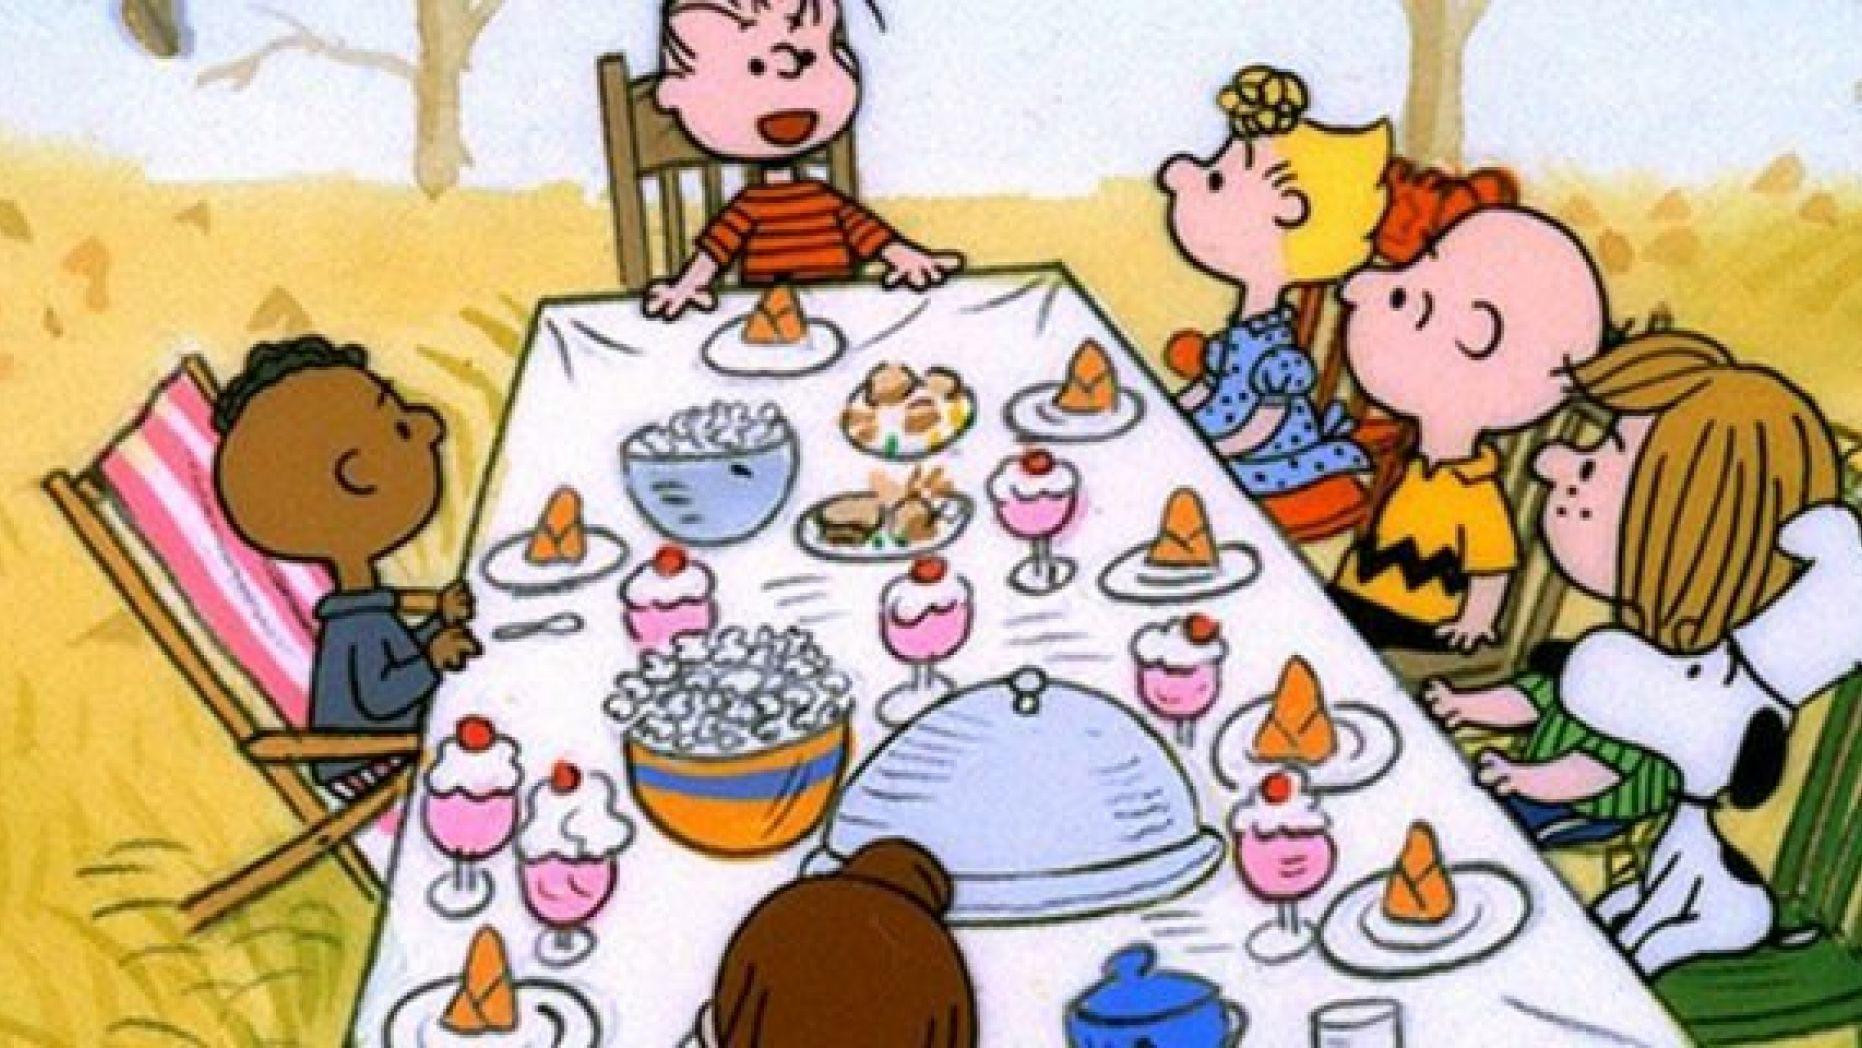 Charlie Brown Thanksgiving Dinner
 Charlie Brown cartoon labelled racist over depiction of